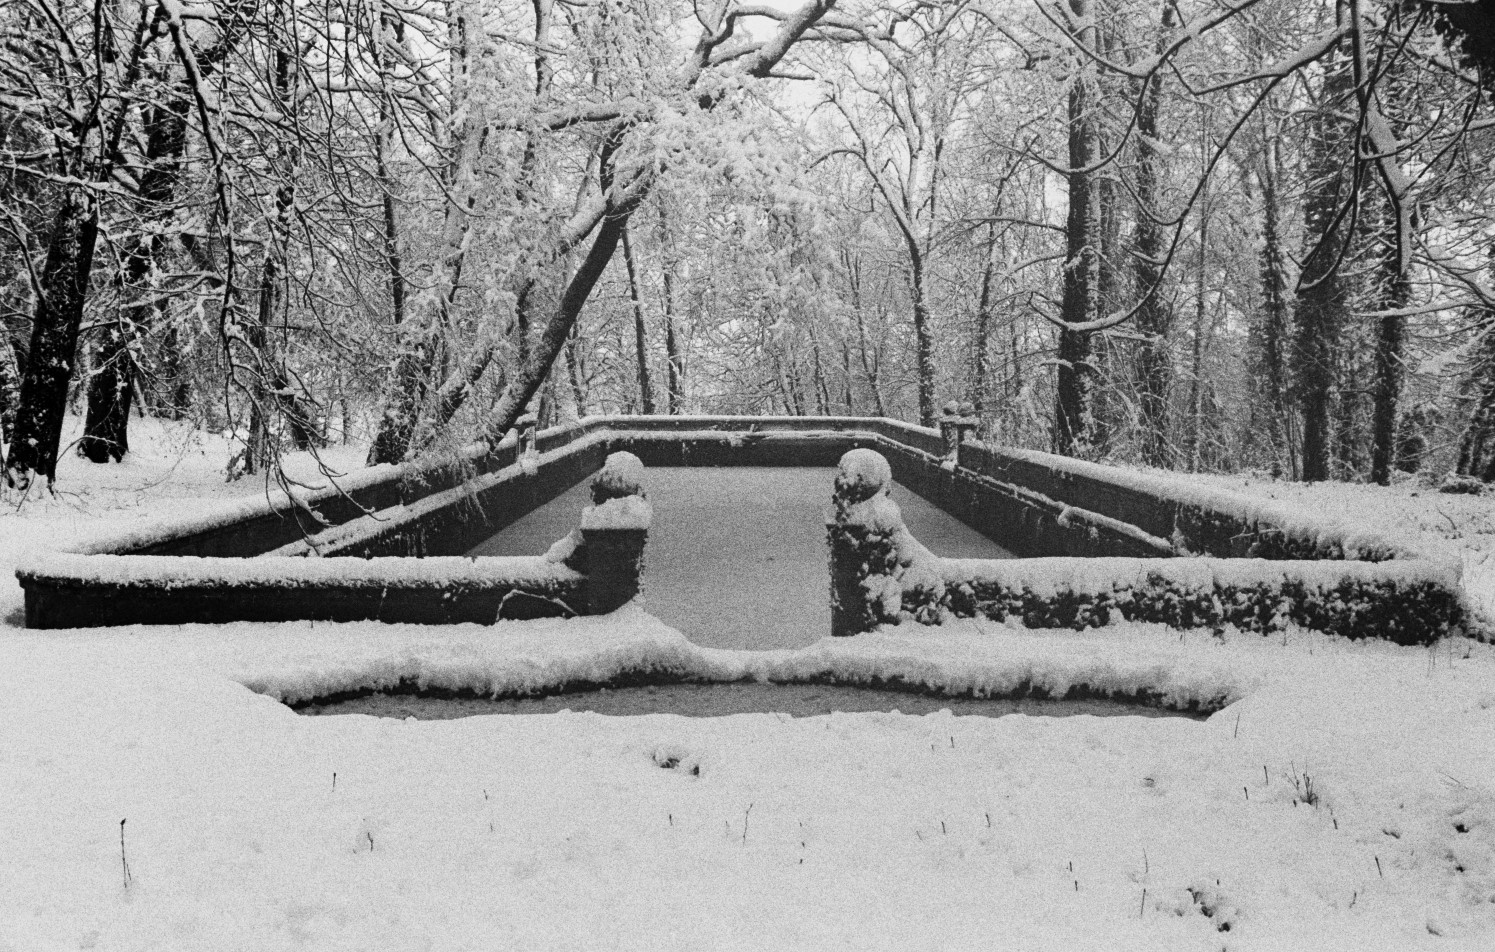 homepage image for Beaulieu album, depicting a pond under snow